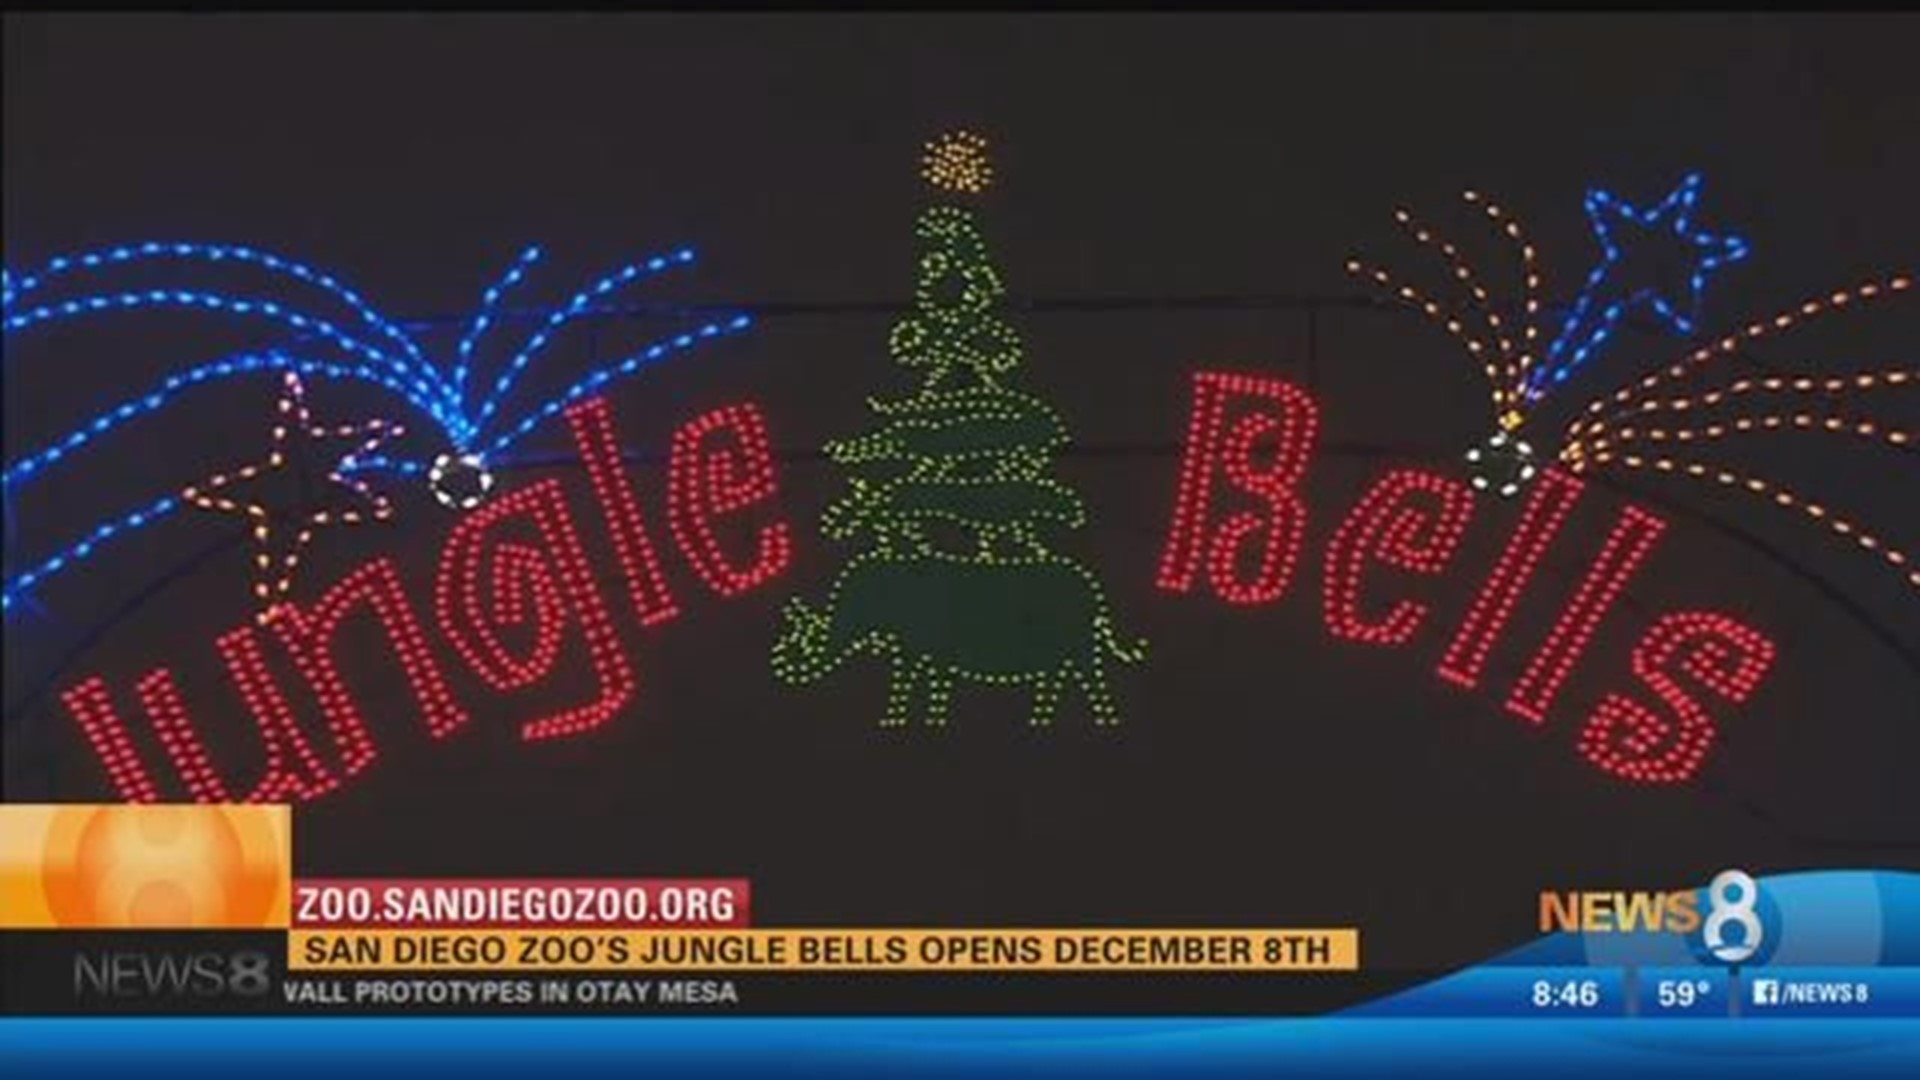 What to Expect at the San Diego Zoo Jungle Bells Holiday Event